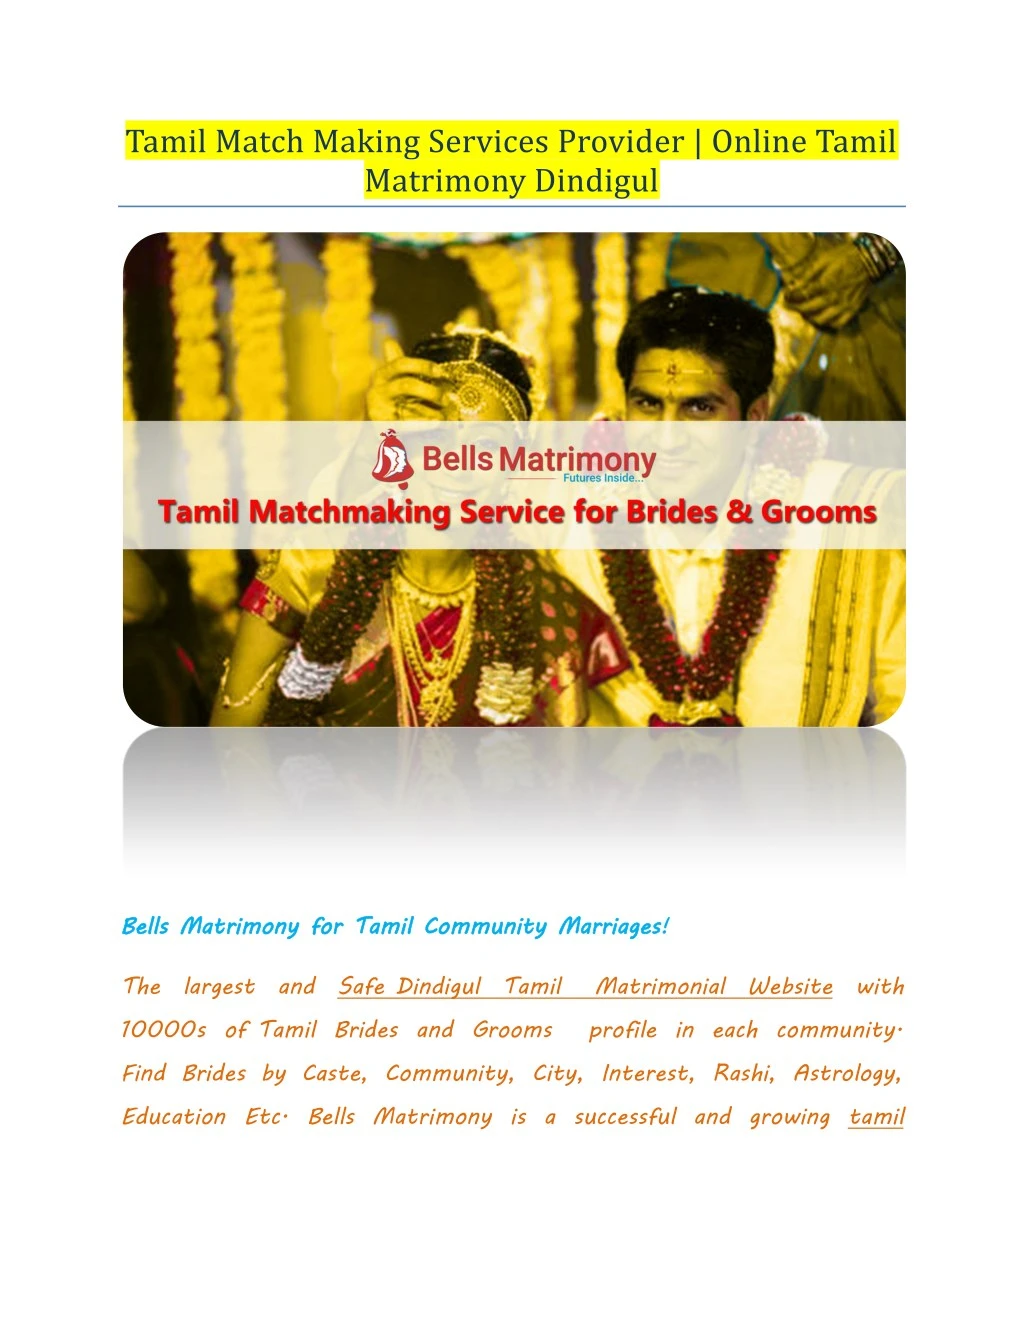 Online Tamil matchmaking